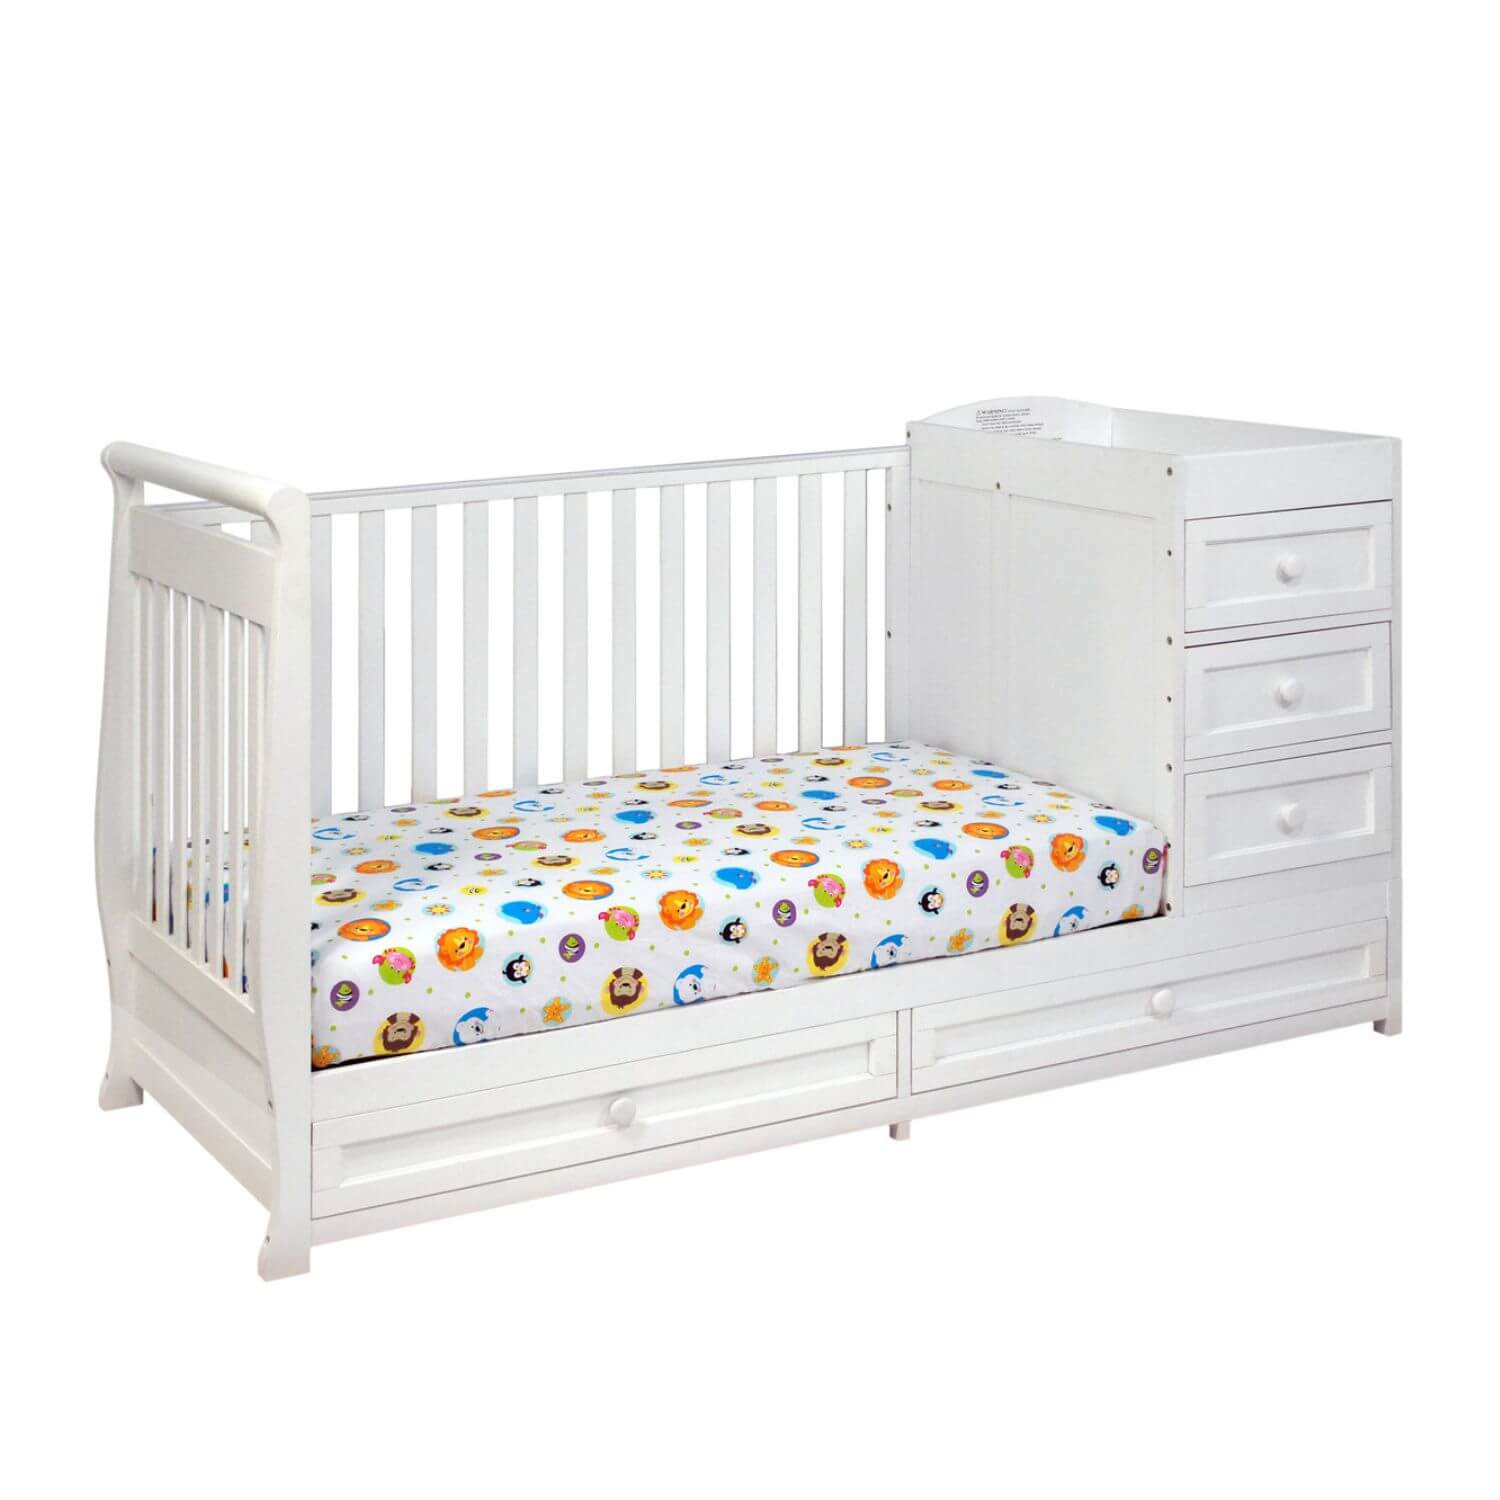 AFG Daphne 3-in-1 Crib and Changer Combo White